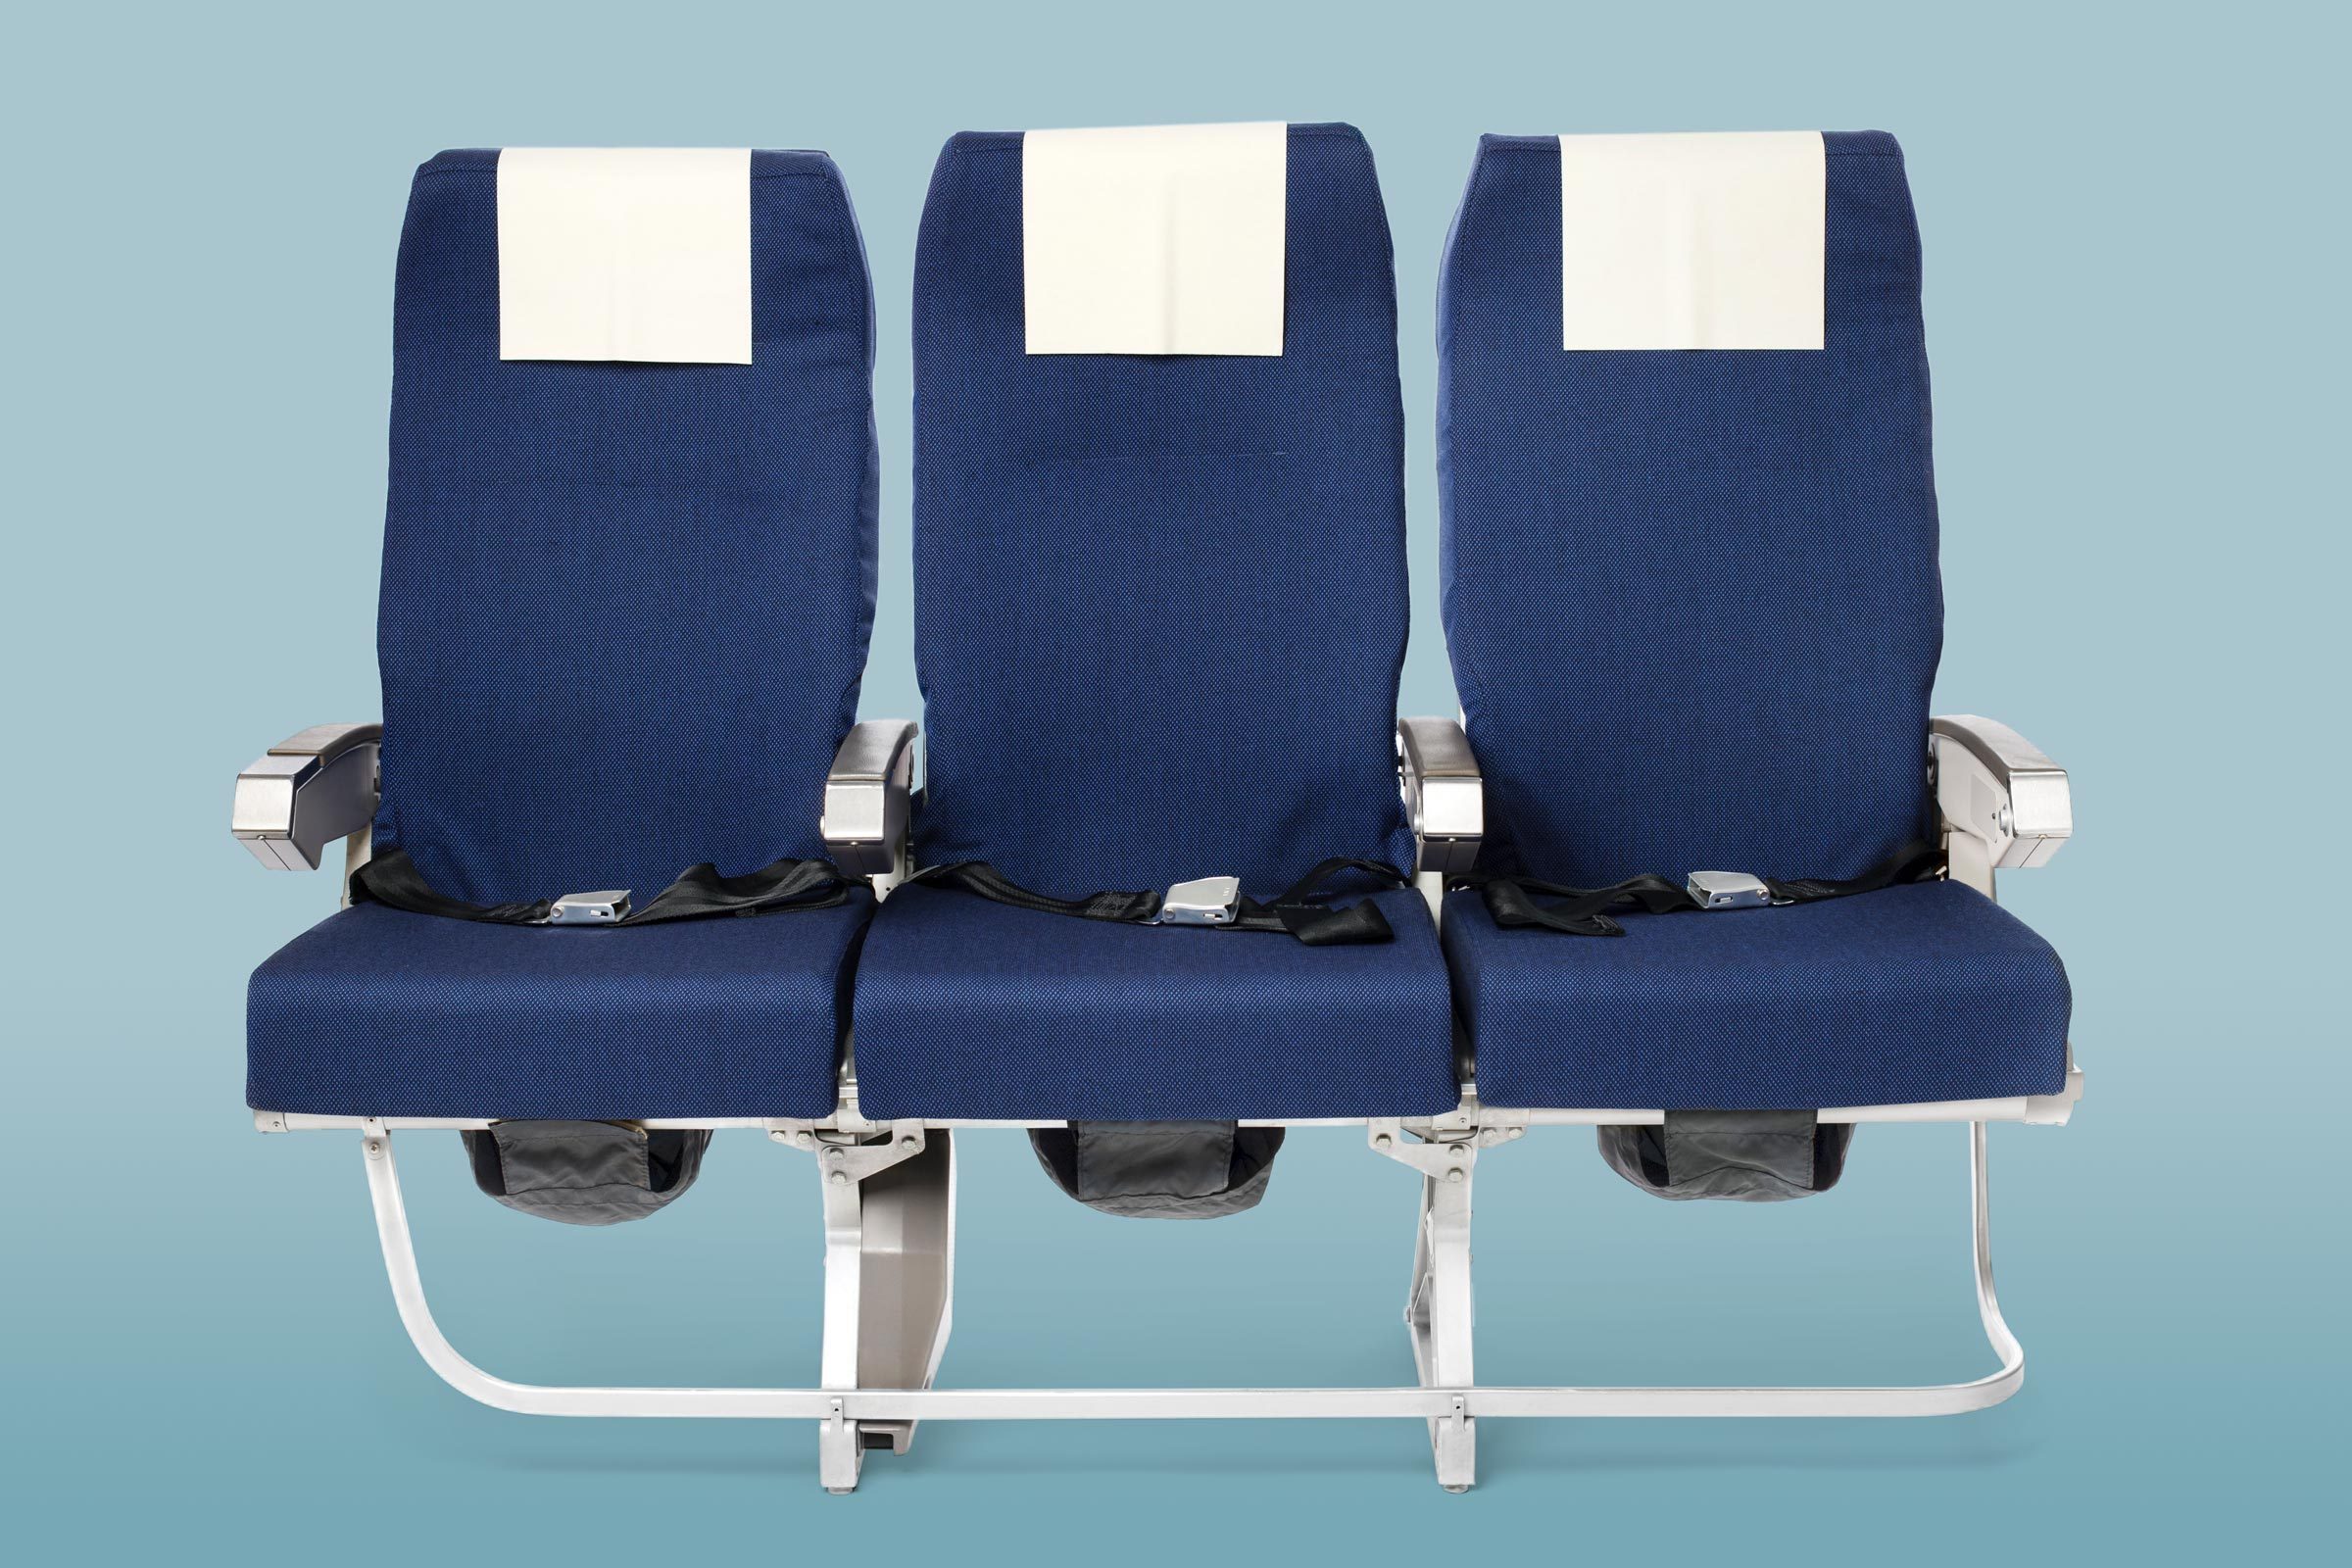 https://www.rd.com/wp-content/uploads/2019/08/airplane-seats-GettyImages-155003722-MLedit.jpg